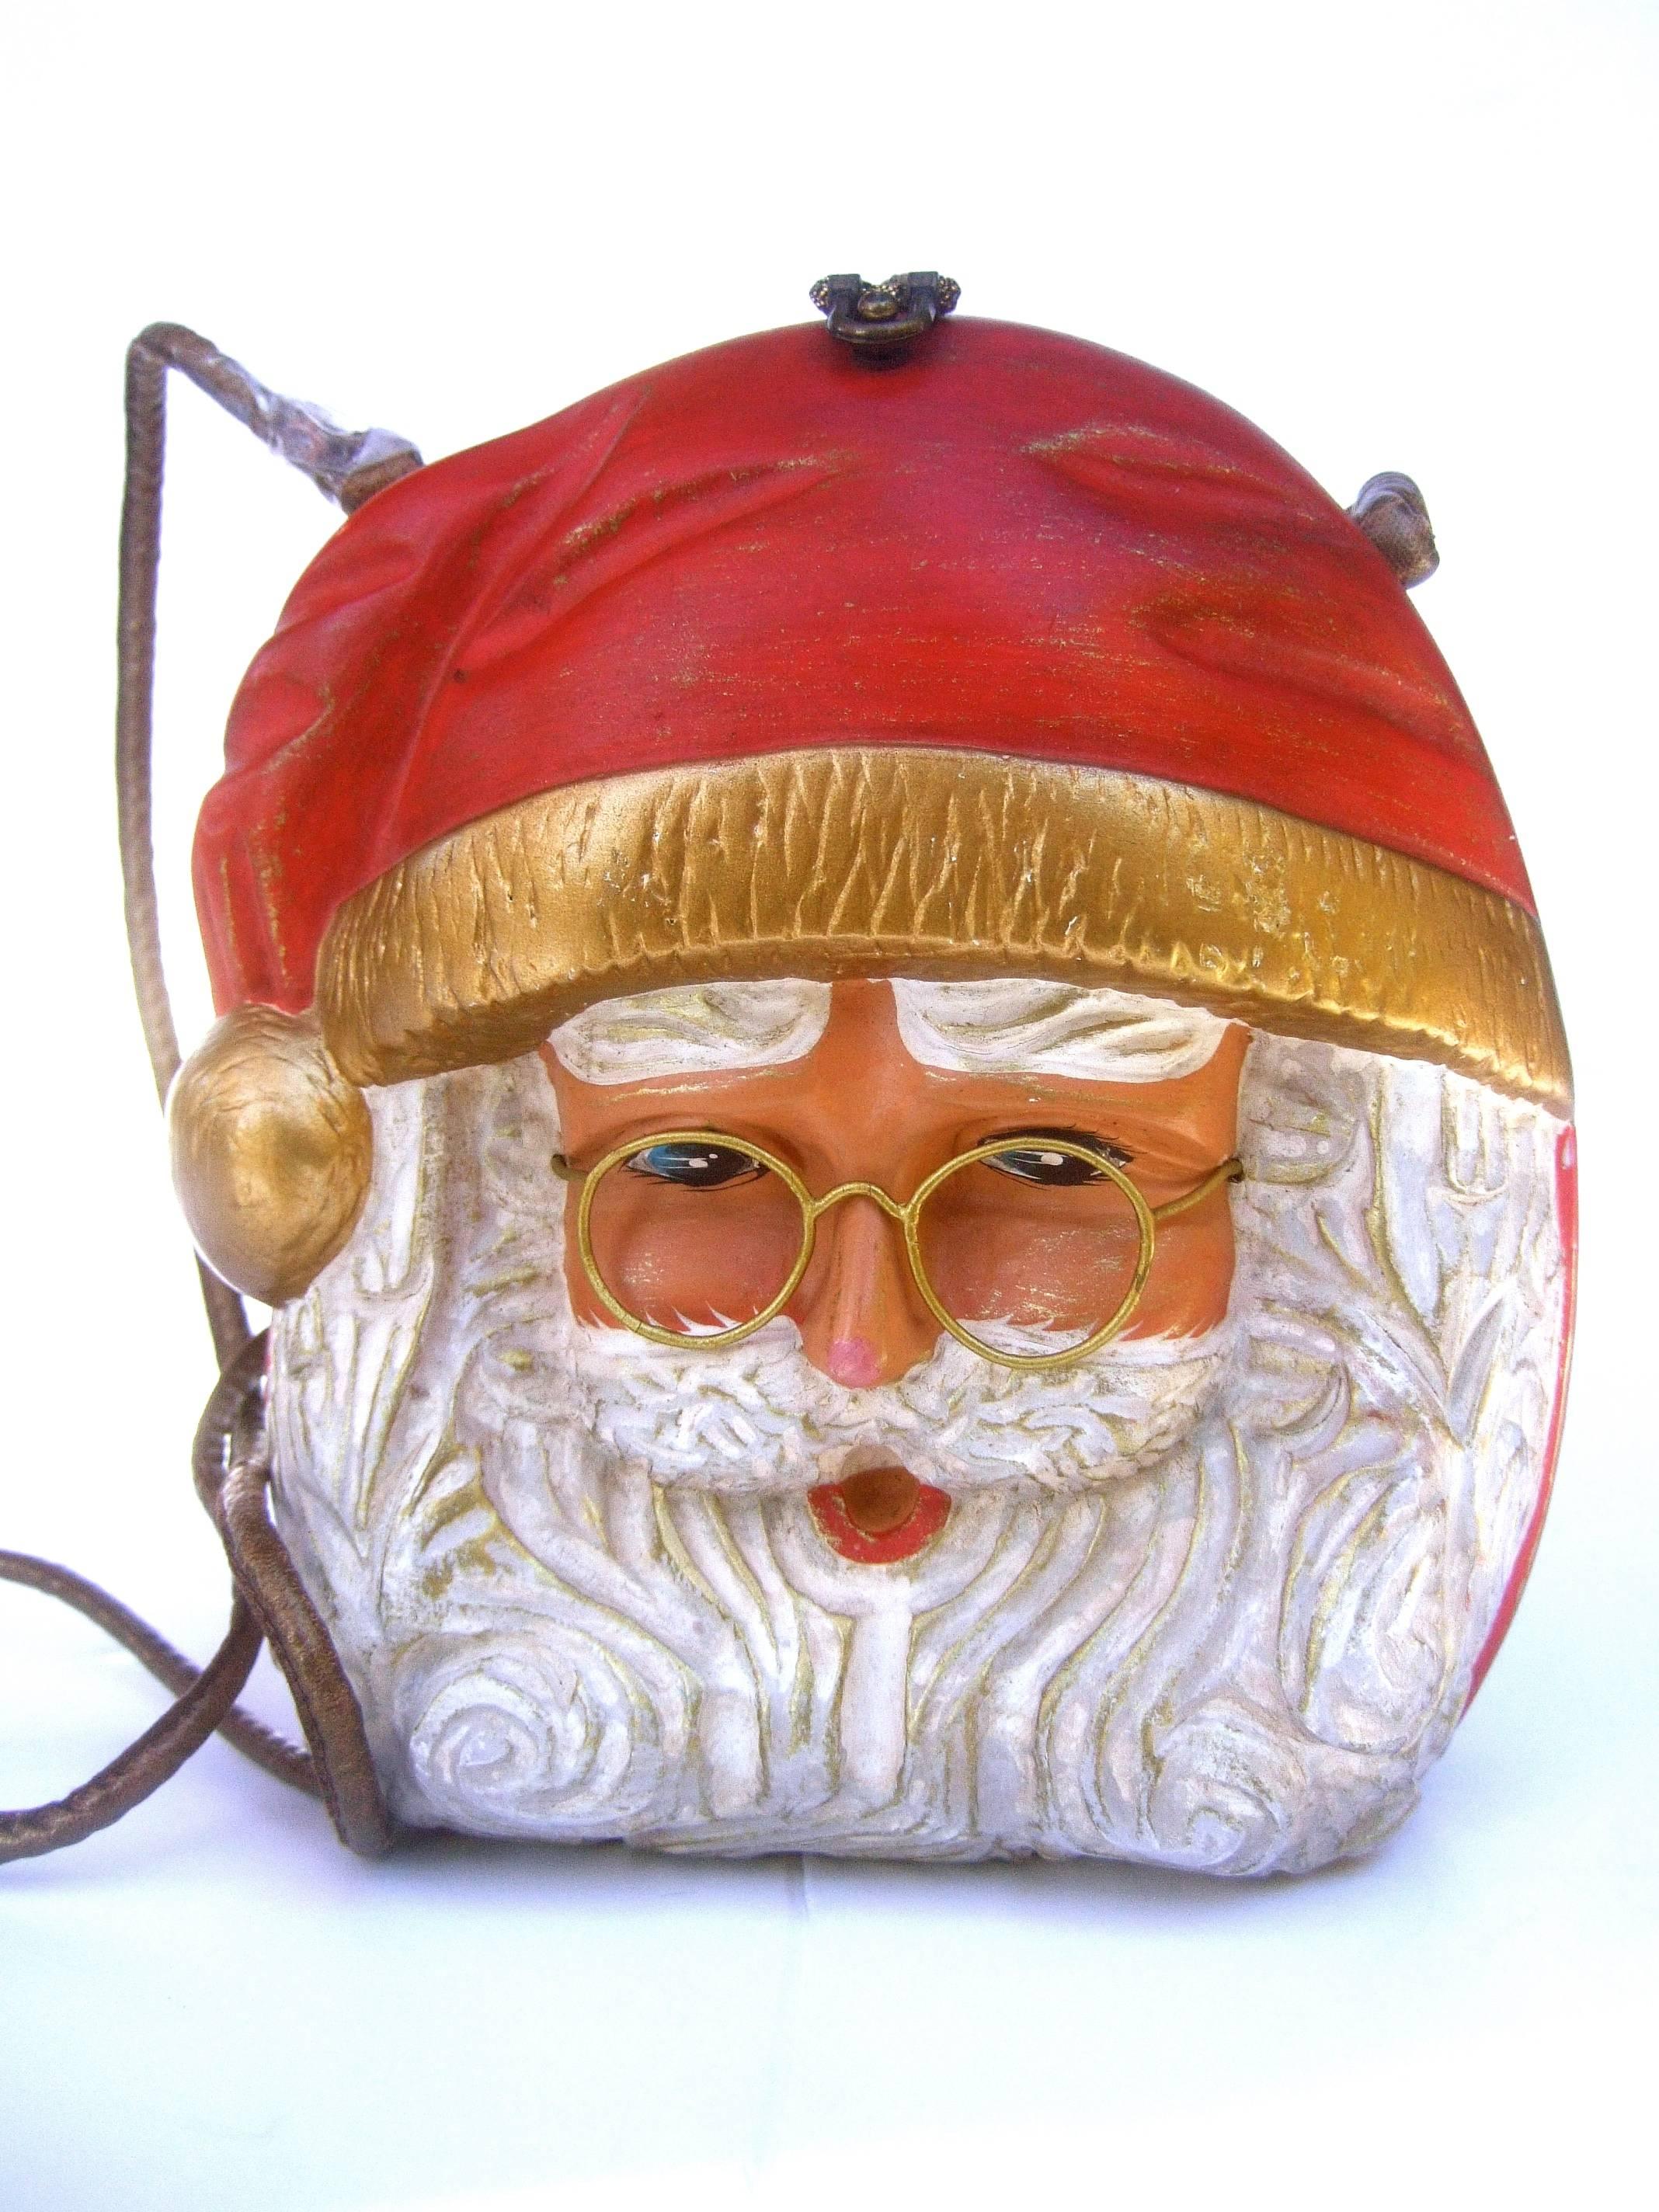 Timmy Woods Beverly Hills Whimsical artisan Santa Claus handbag
The charming hand carved wood handbag depicts jolly old St Nick

His features are illuminated with hand painted enamel detail
Paired with wire frame spectacles and a bushy carved beard